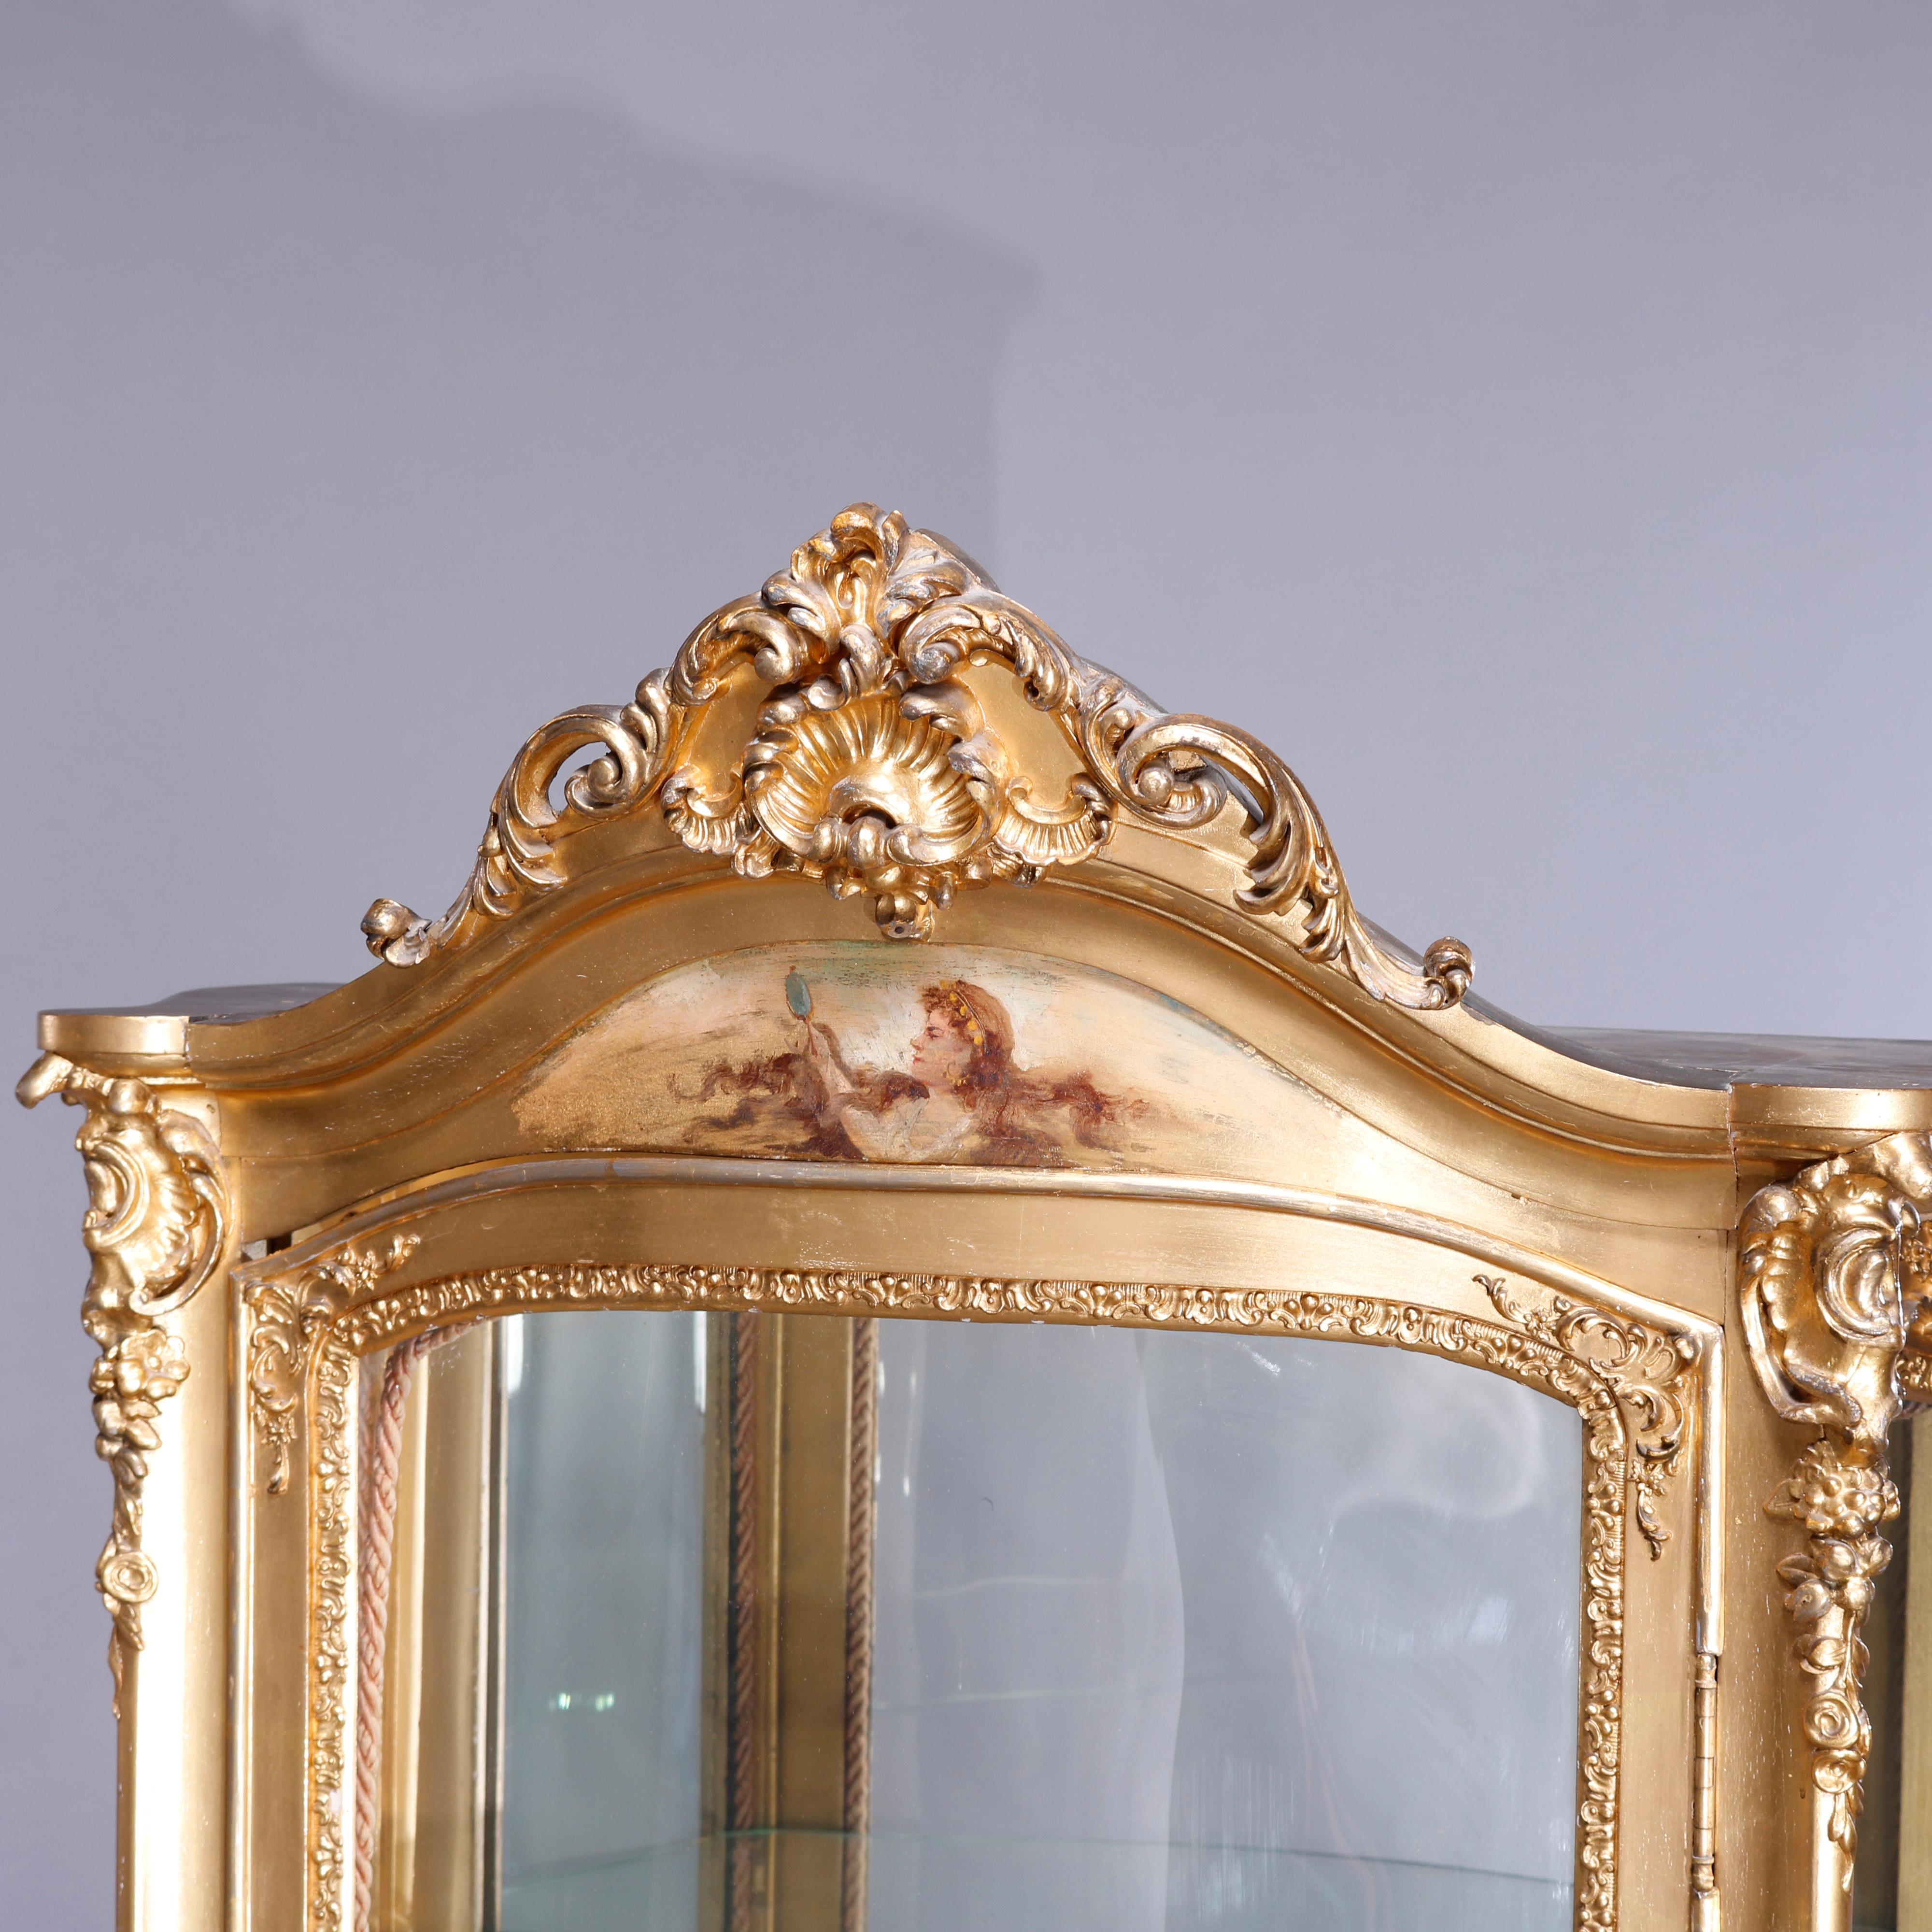 19th Century Antique French Louis XIV Style Vernis Martin Decorated Giltwood Vitrine d1890